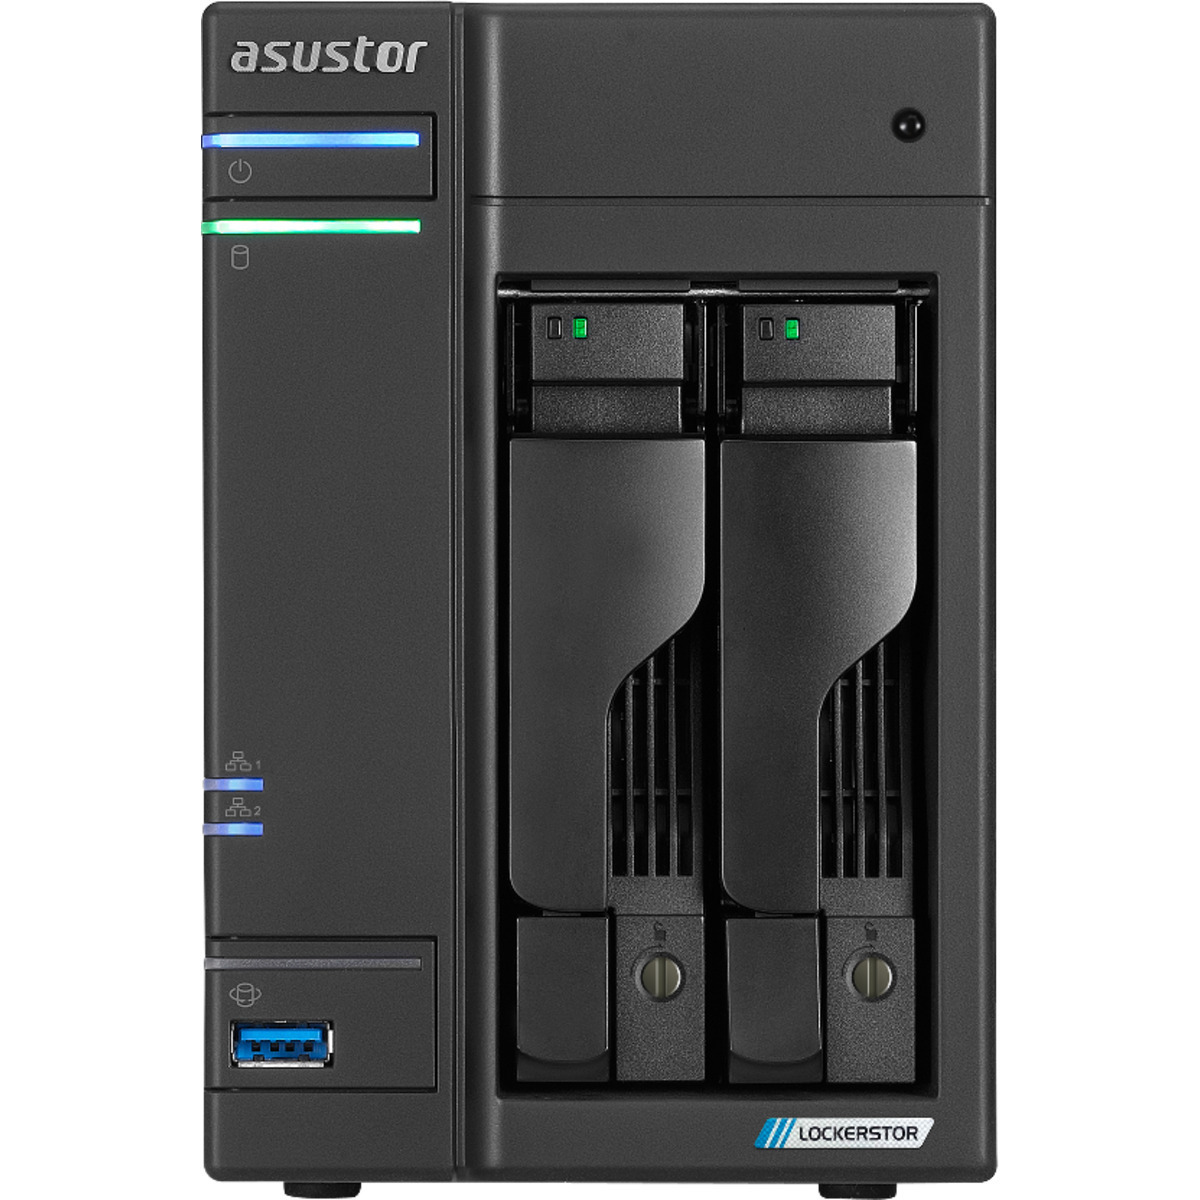 ASUSTOR LOCKERSTOR 2 Gen2 AS6702T 16tb 2-Bay Desktop Multimedia / Power User / Business NAS - Network Attached Storage Device 1x16tb Seagate IronWolf Pro ST16000NT001 3.5 7200rpm SATA 6Gb/s HDD NAS Class Drives Installed - Burn-In Tested - ON SALE - FREE RAM UPGRADE LOCKERSTOR 2 Gen2 AS6702T